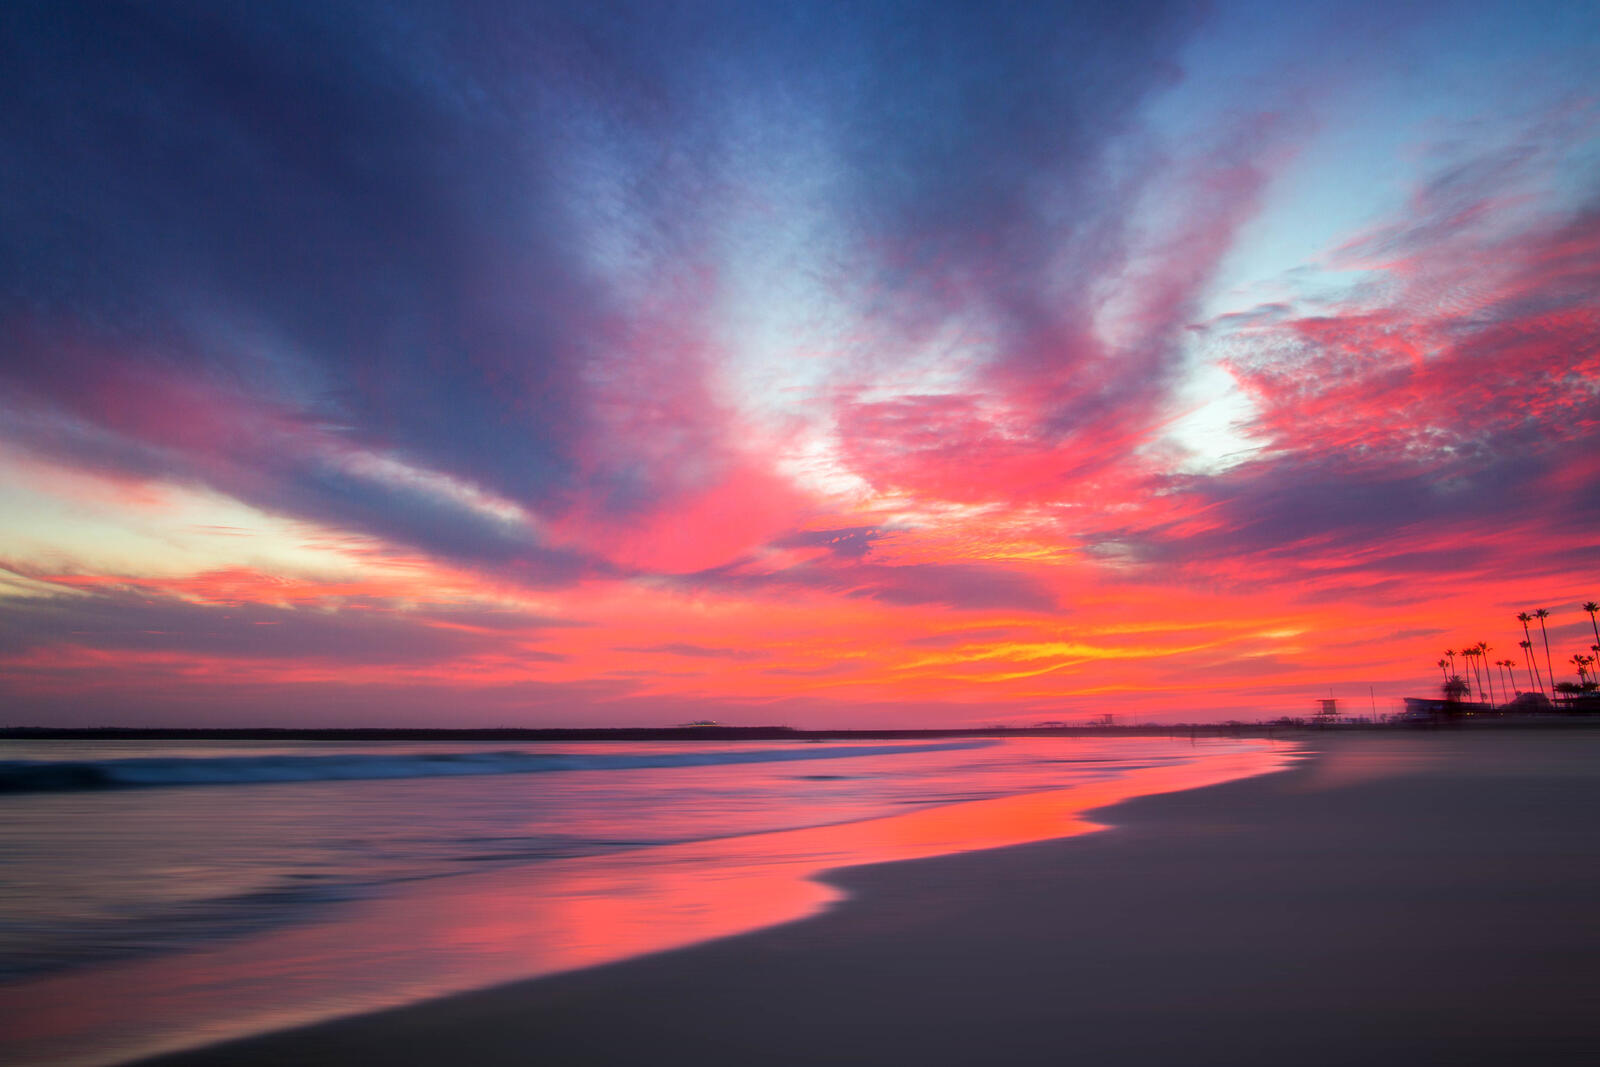 Free photo A colorful sunset on a sandy beach